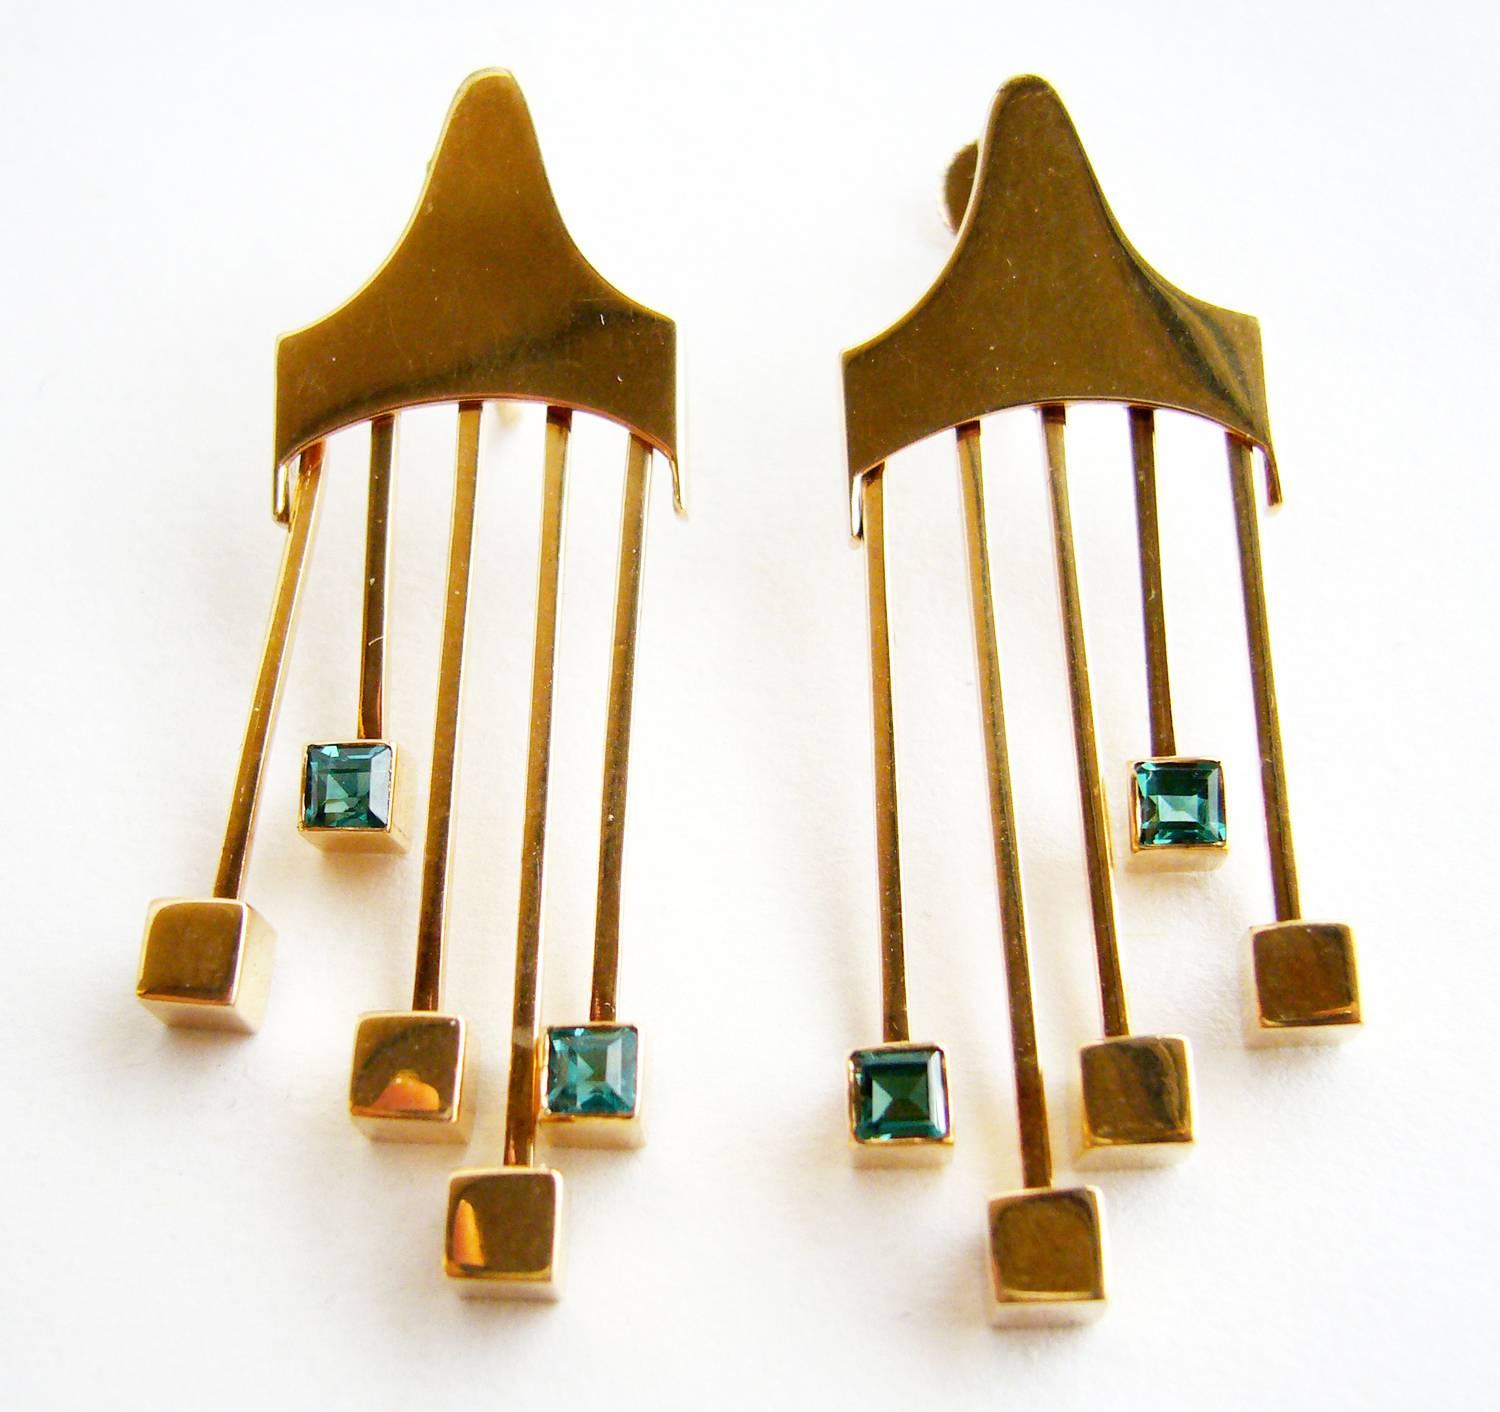 Rare, Finnish modernist 14k gold and tourmaline screw back earrings designed by Paula Häiväoja and executed by master goldsmith, Timo Nupponen for Kaunis Koru.  Earrings feature kinetic gold fringe with blueish green square tourmaline on the tips